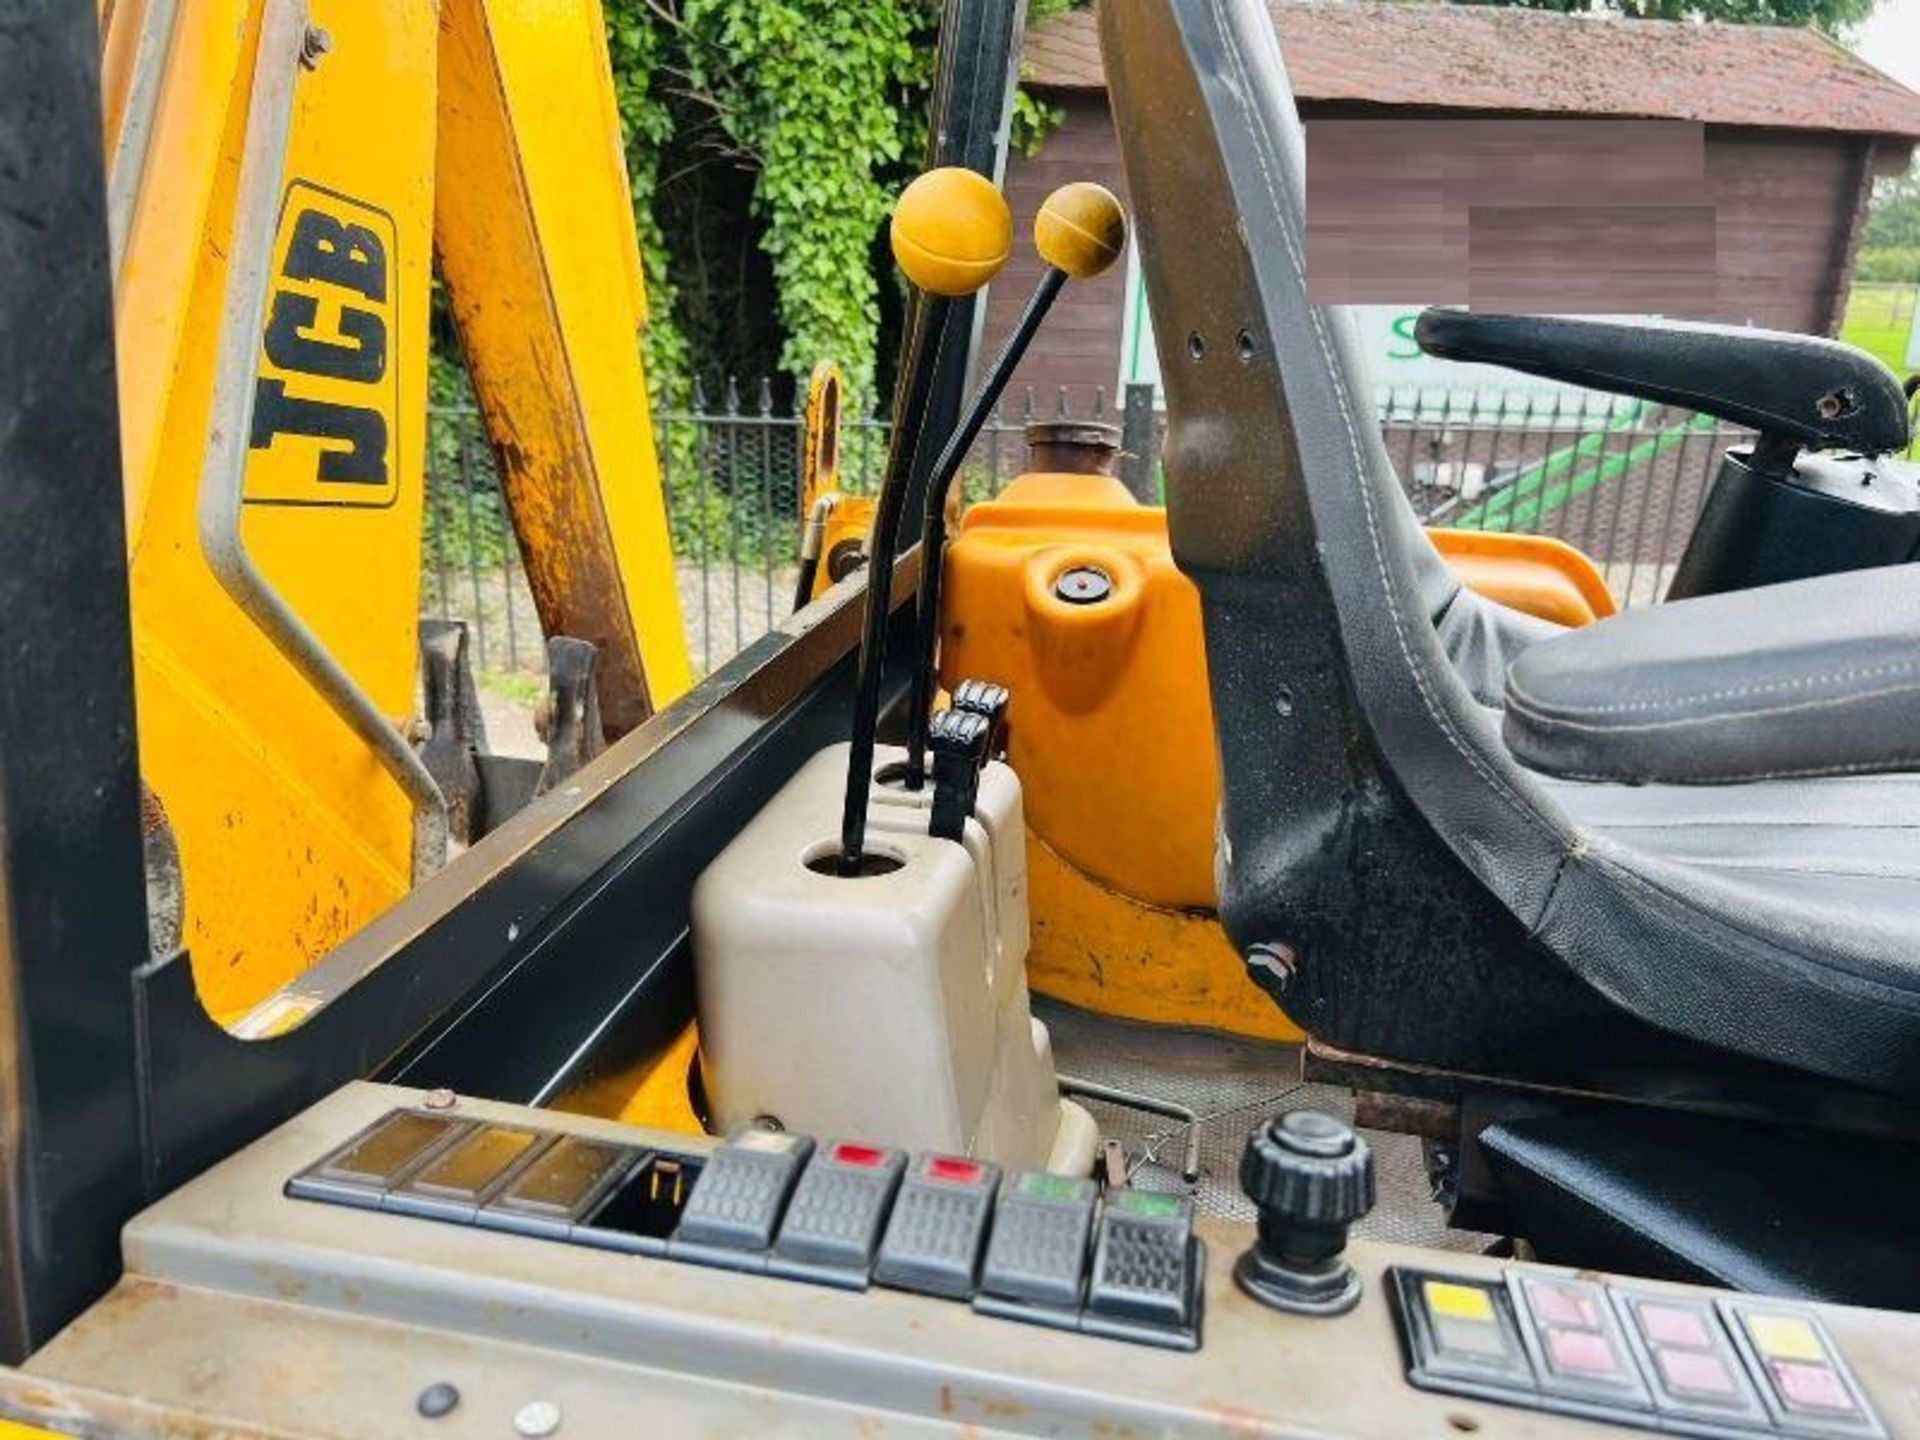 JCB 1CX 4WD BACKHOE DIGGER C/W BUCKET & TINES - Image 18 of 20